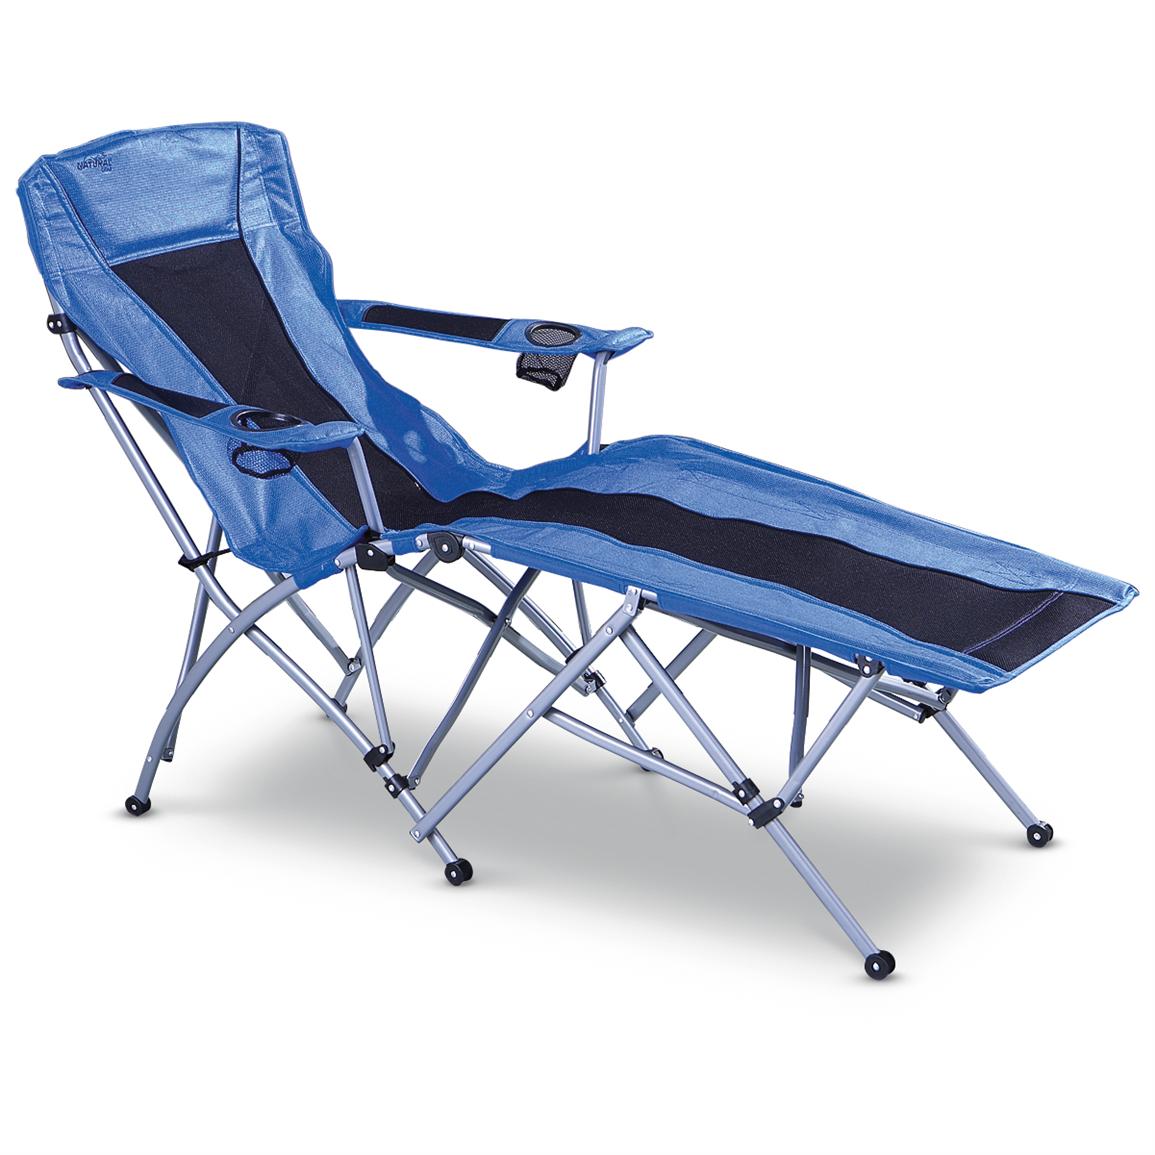 Folding Lounge Chair 180115, Camping Chairs at Sportsman